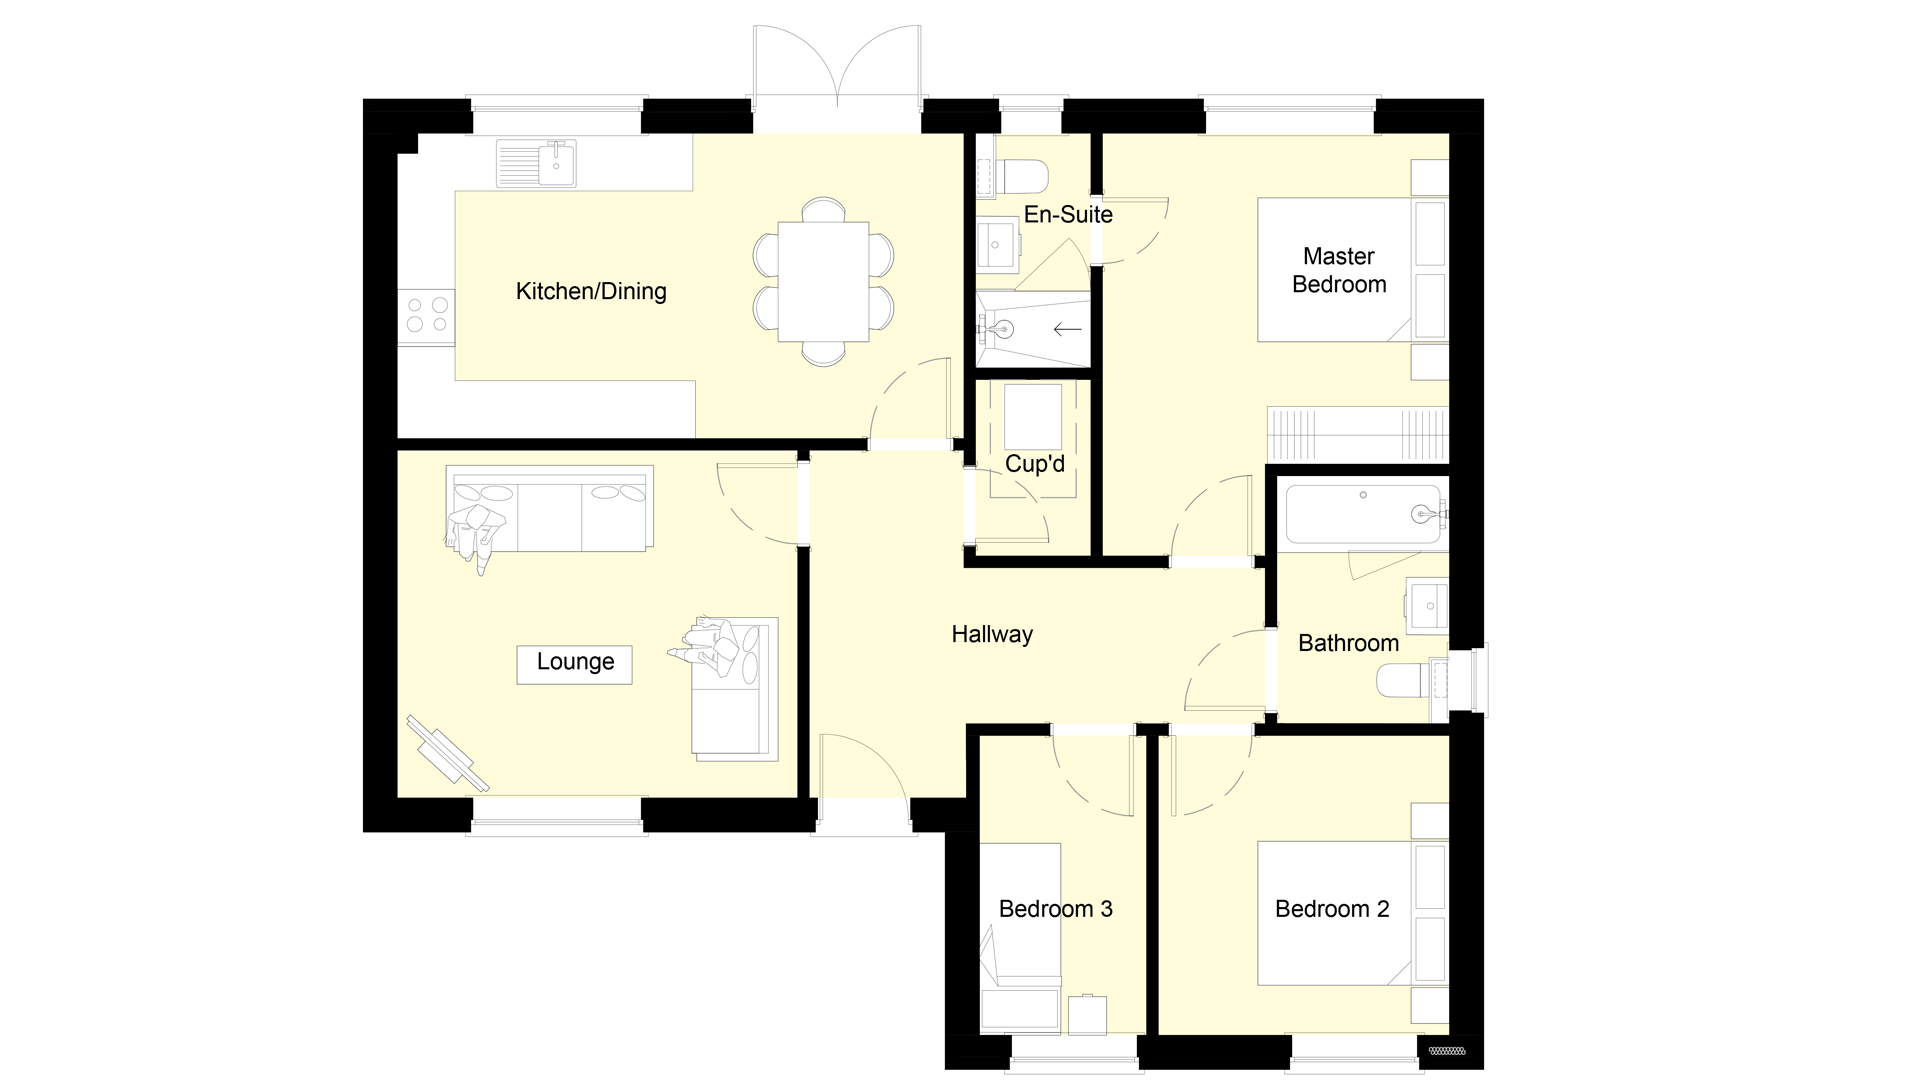 Layout of the ground floor Plot 4 Woodside court.